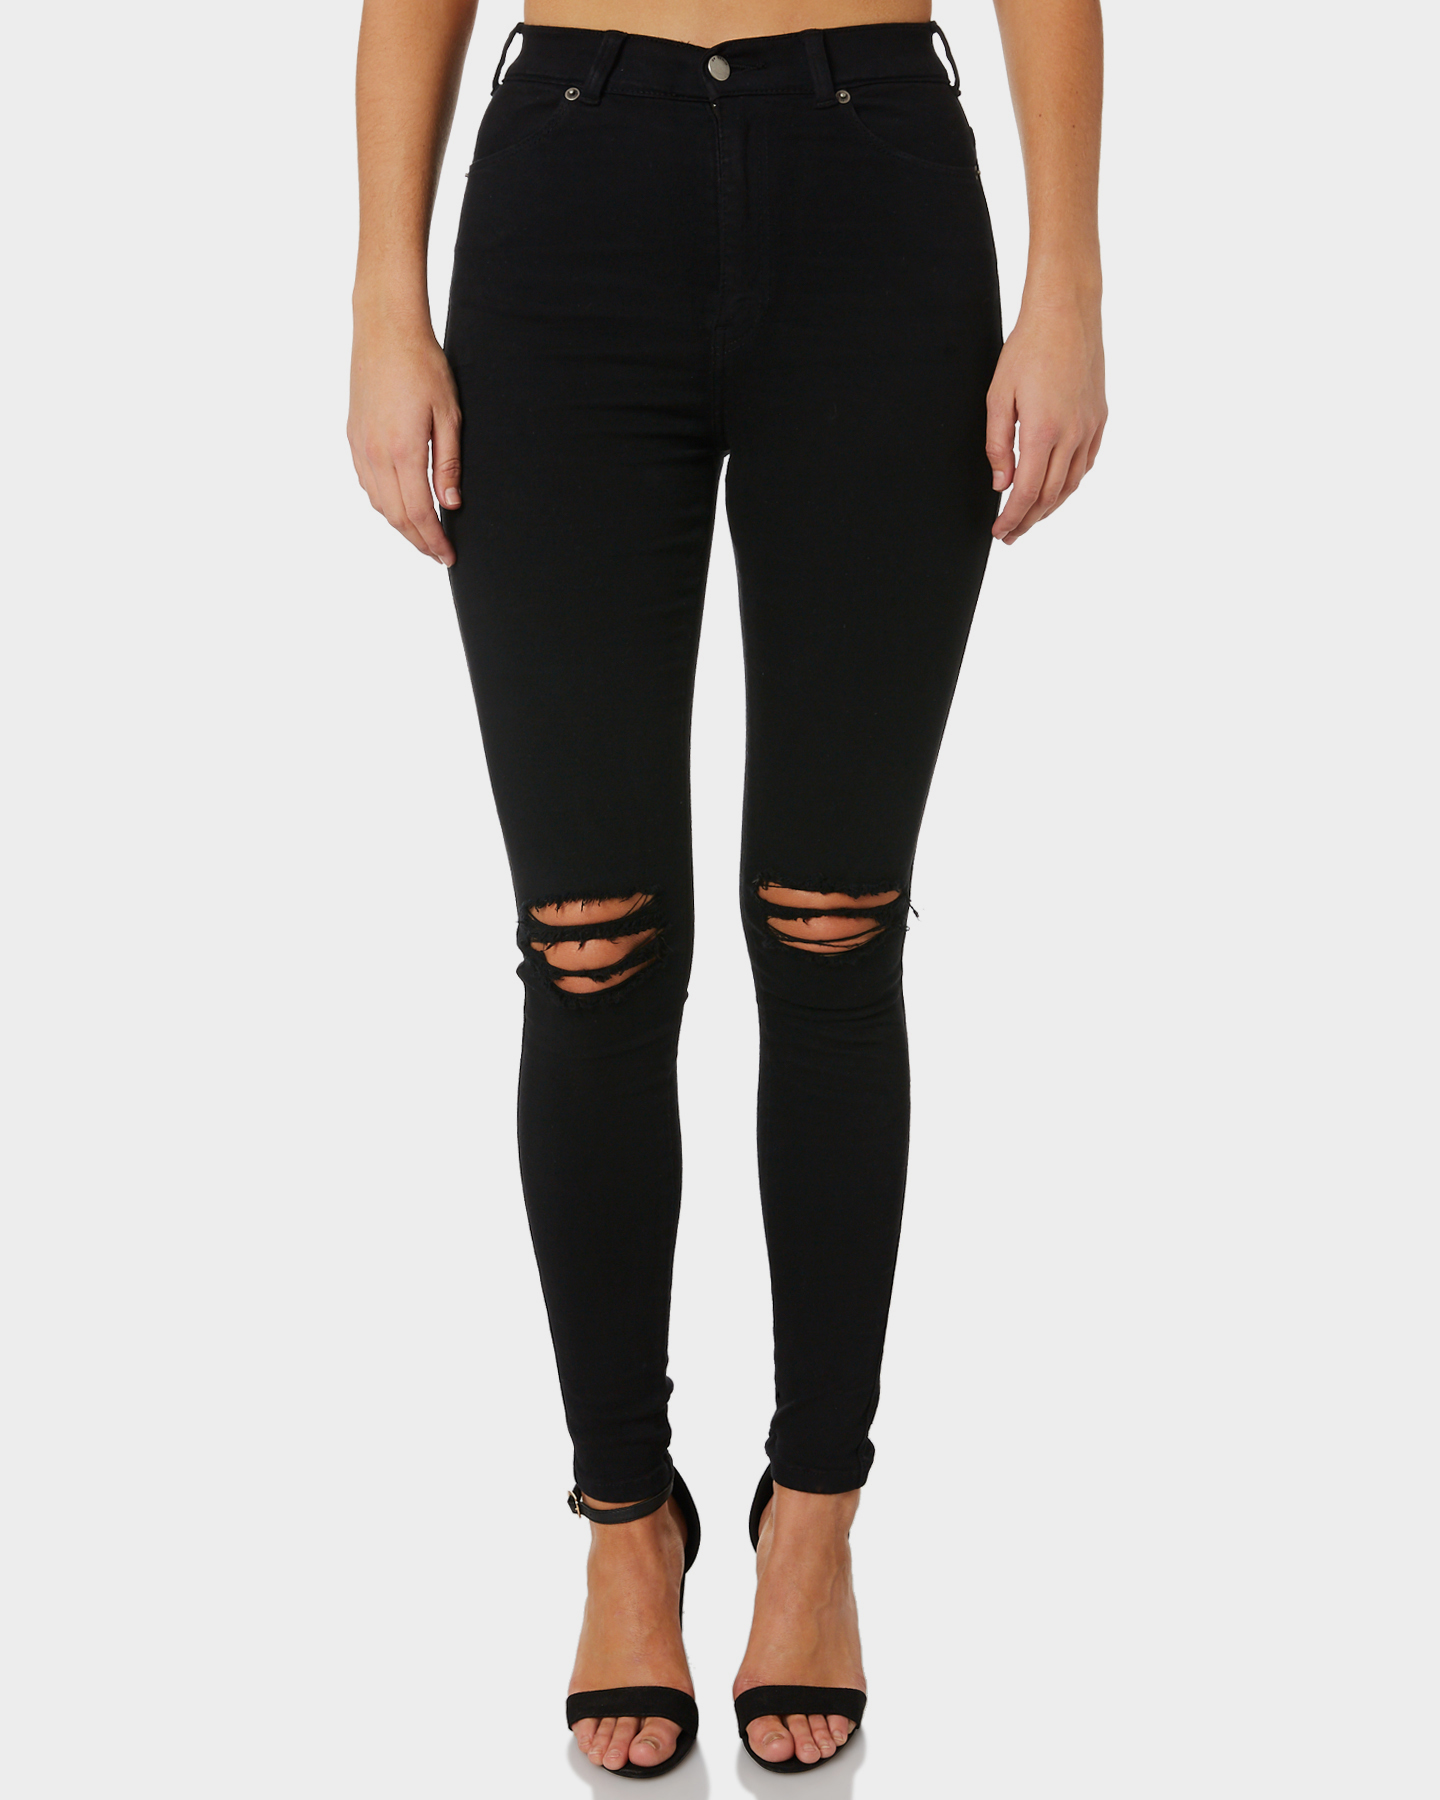 buy black ripped jeans